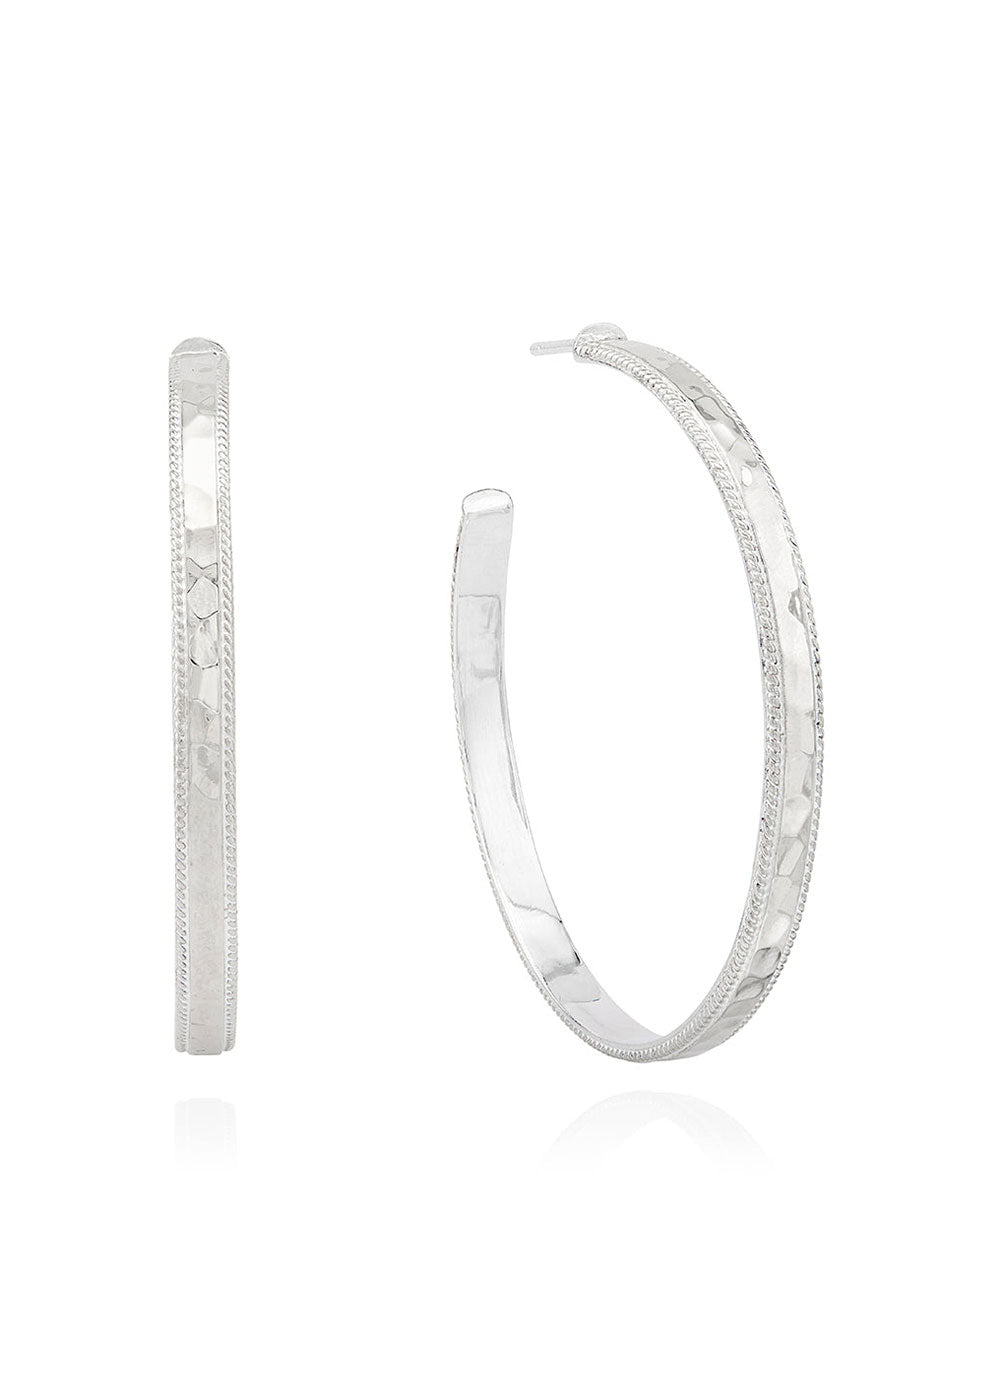 Anna Beck Large Hammered Hoop Earrings - Silver